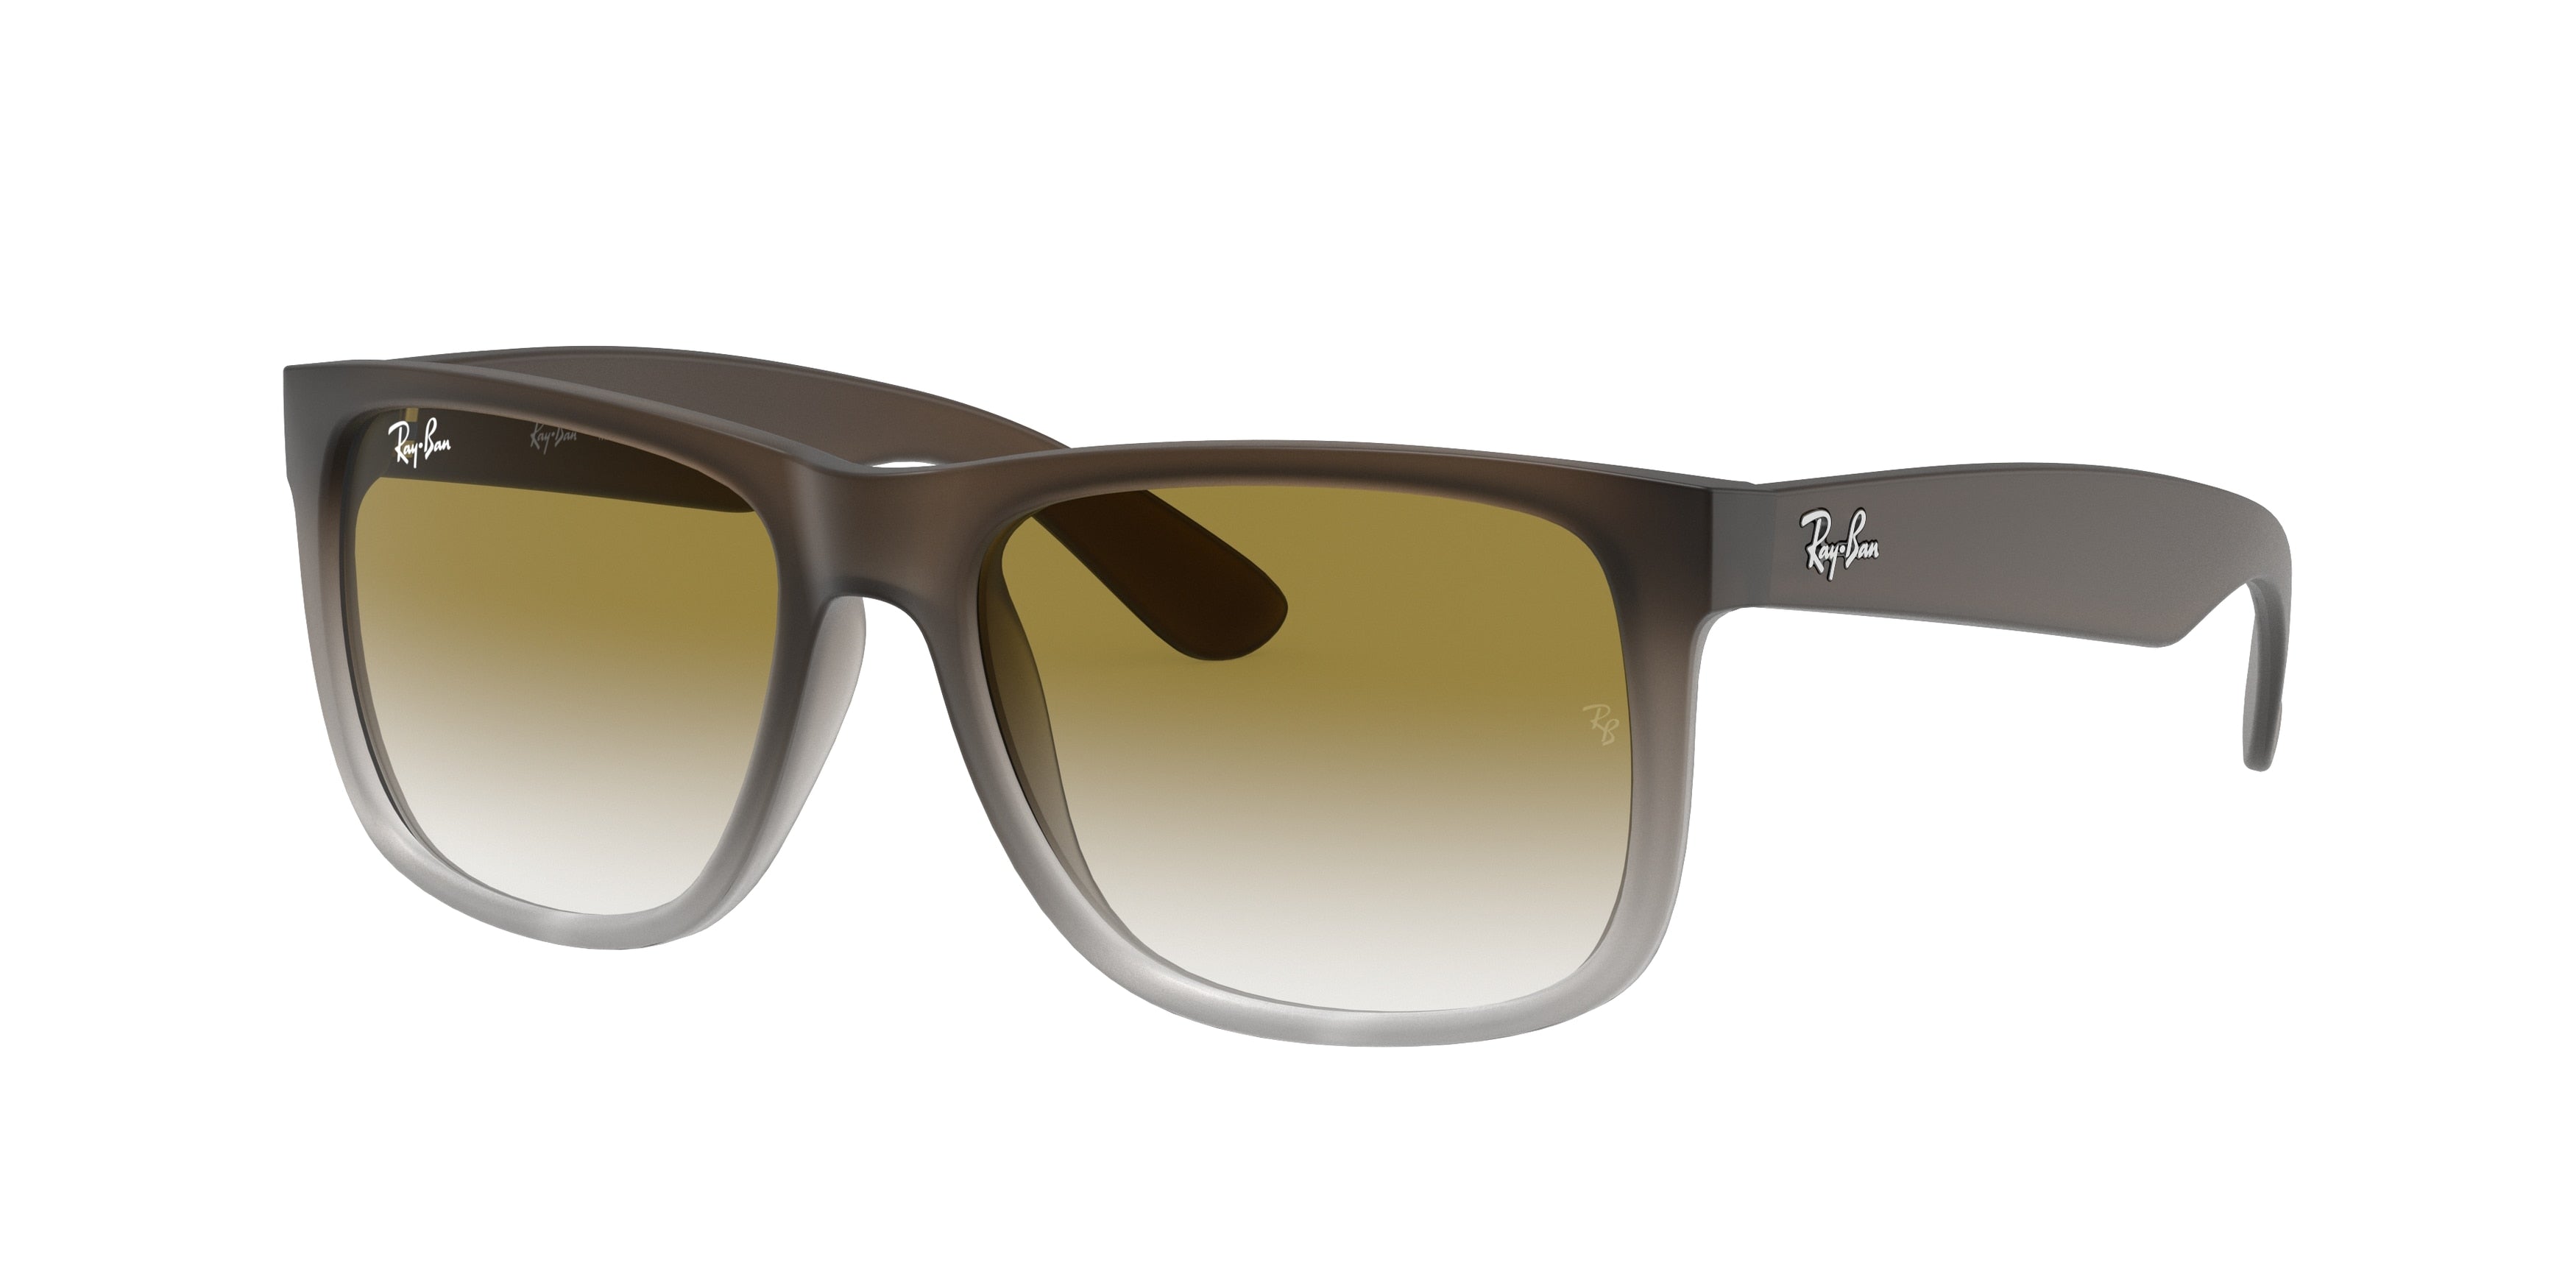 Ray-Ban JUSTIN RB4165 Square Sunglasses  854/7Z-Brown 53-145-16 - Color Map Brown